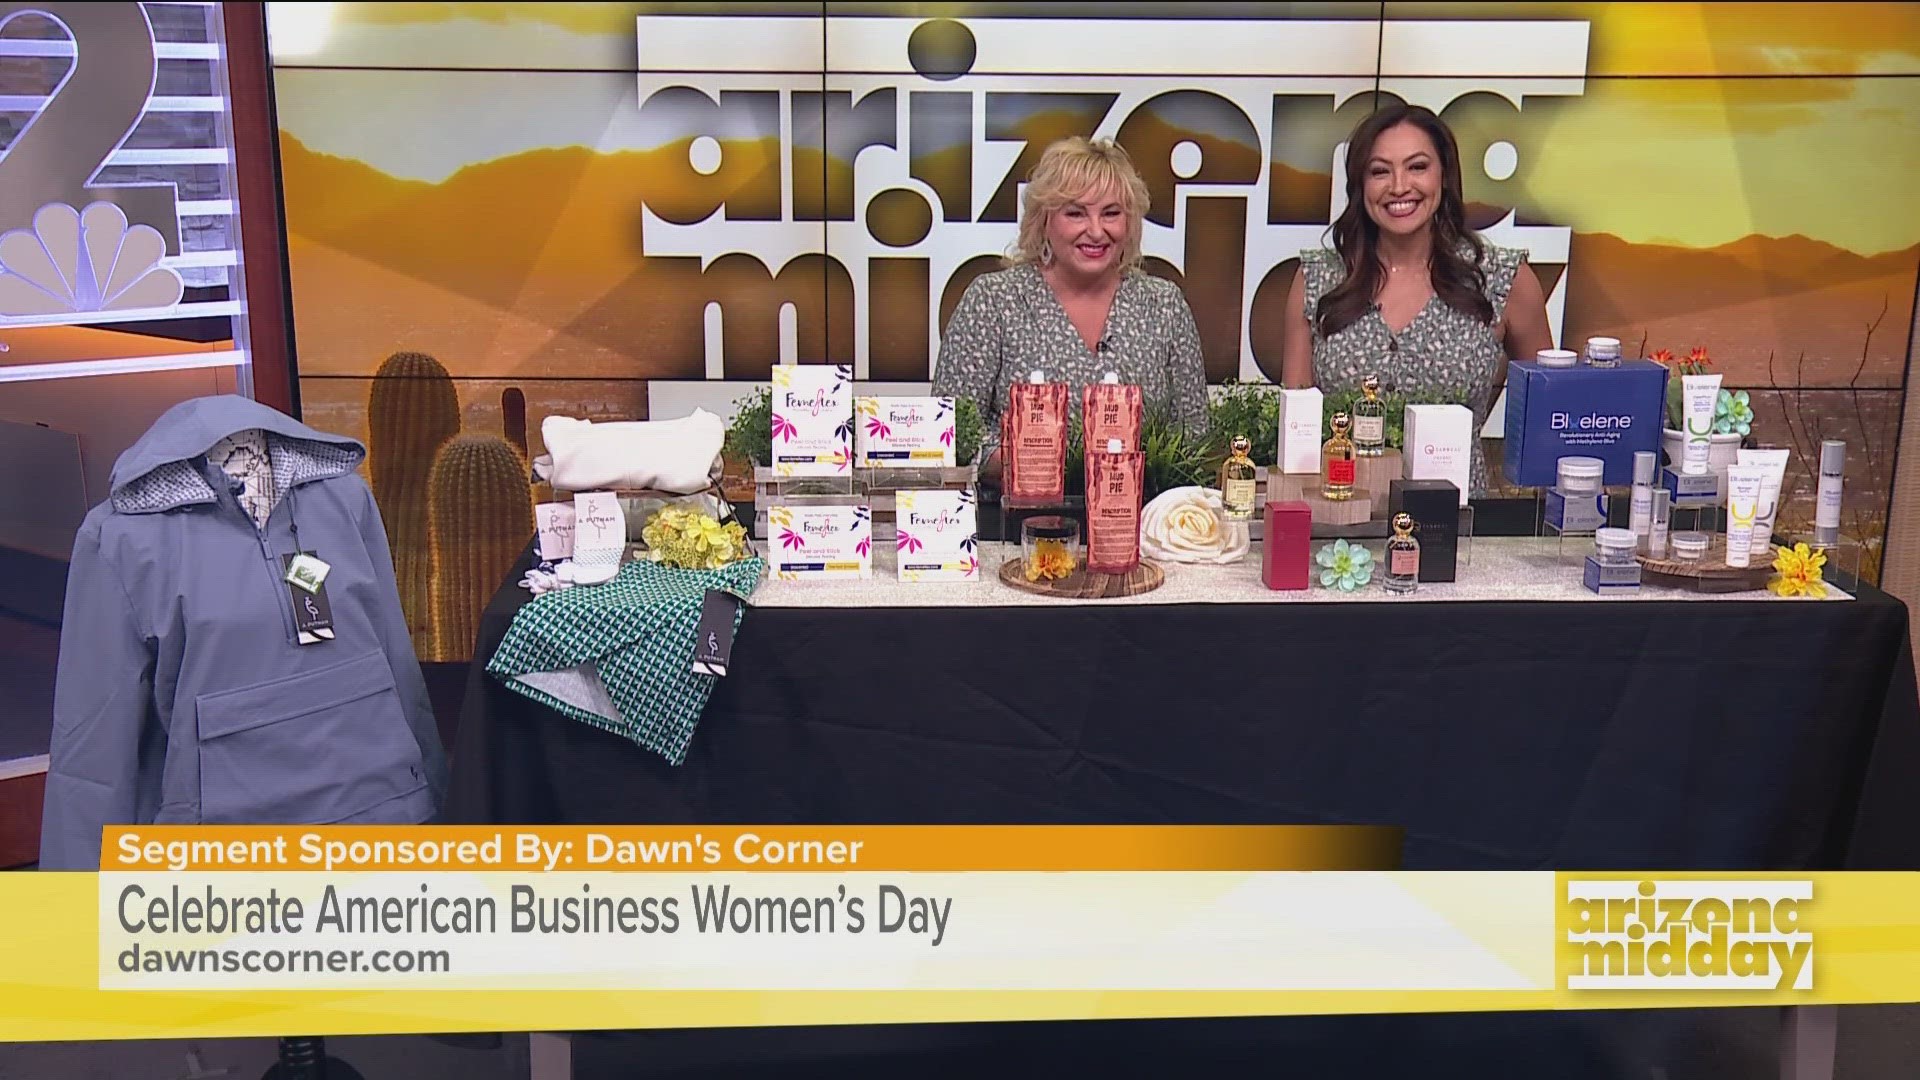 Dawn McCarthy of Dawn’s Corner shares some products founded, developed, created or led by women in honor of American Business Women's Day on September 22nd.